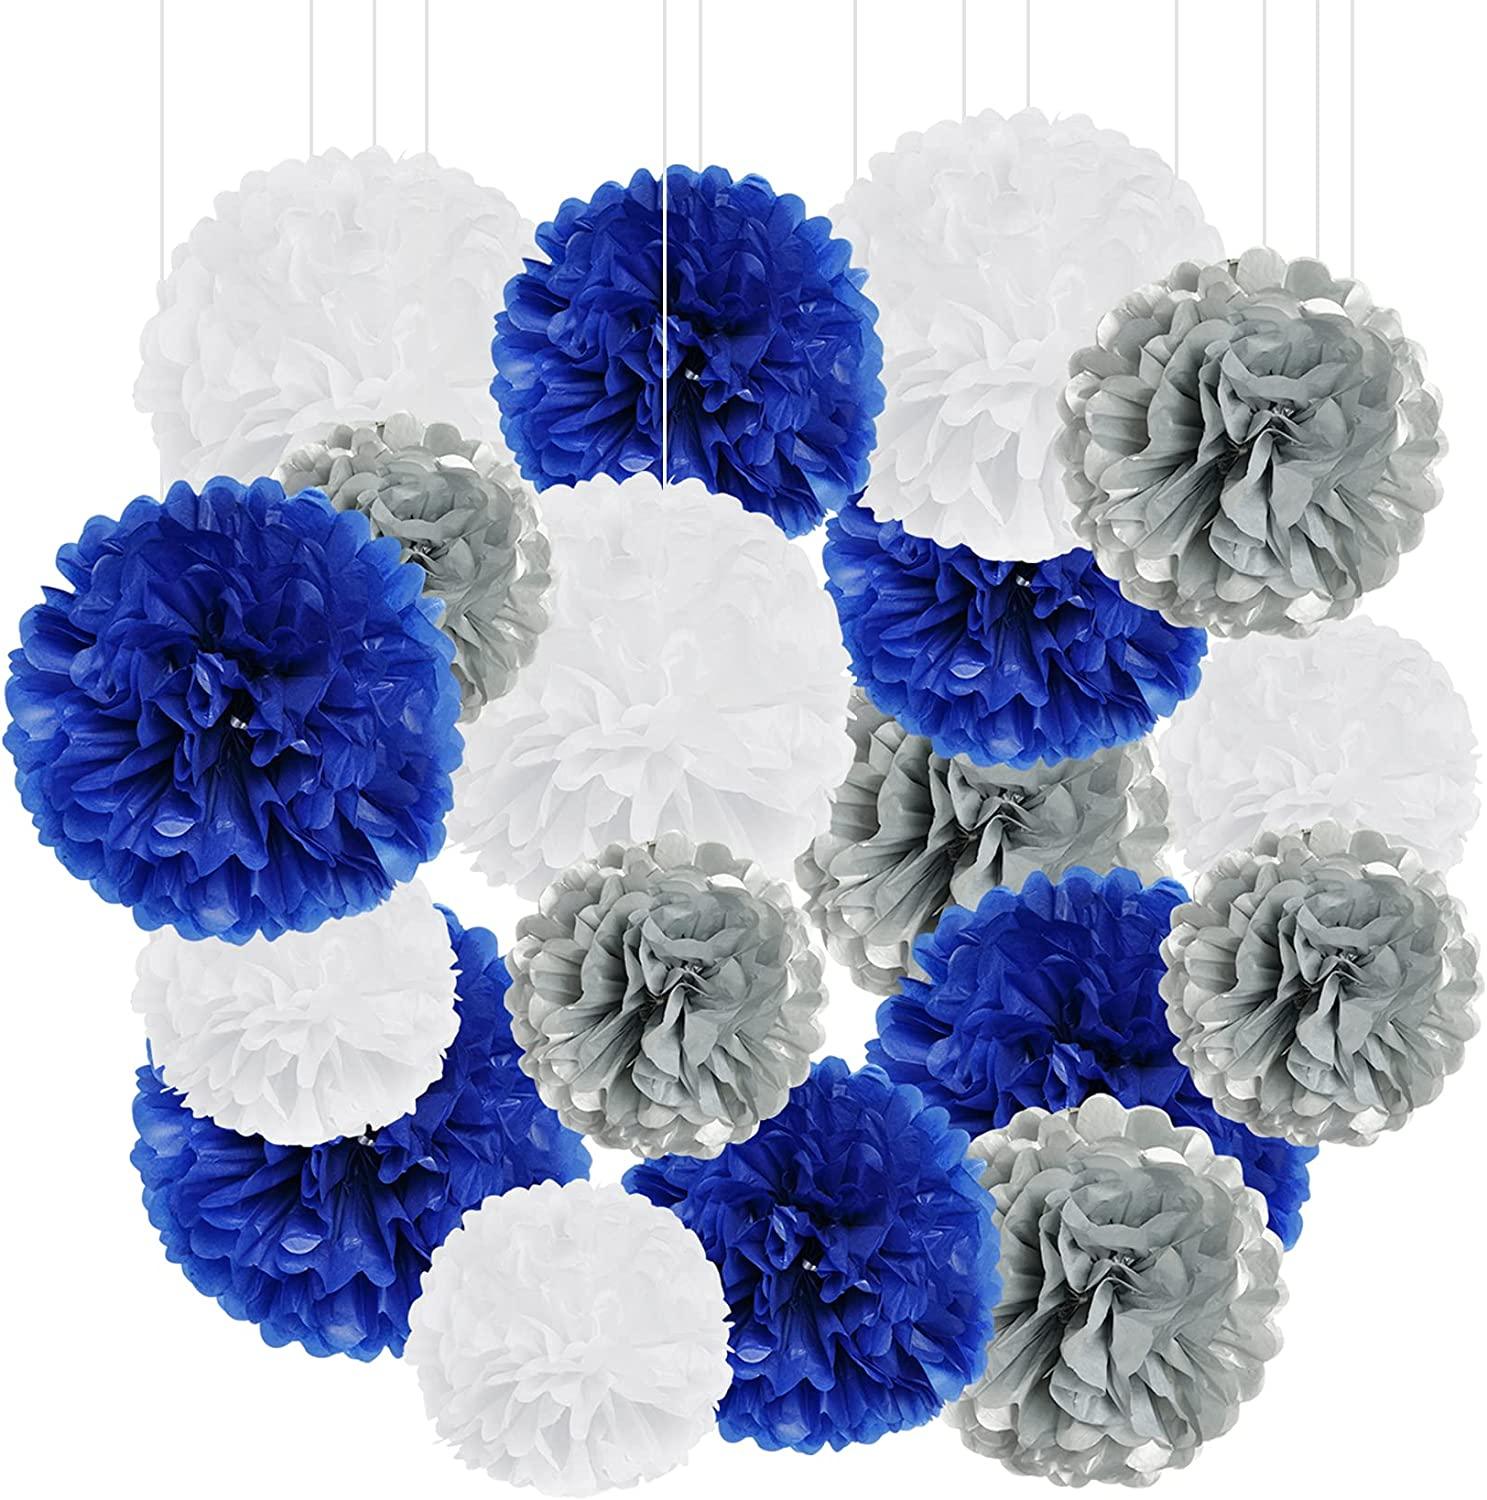 Mylar Paper Poofs Add Color To Your Party Centerpieces